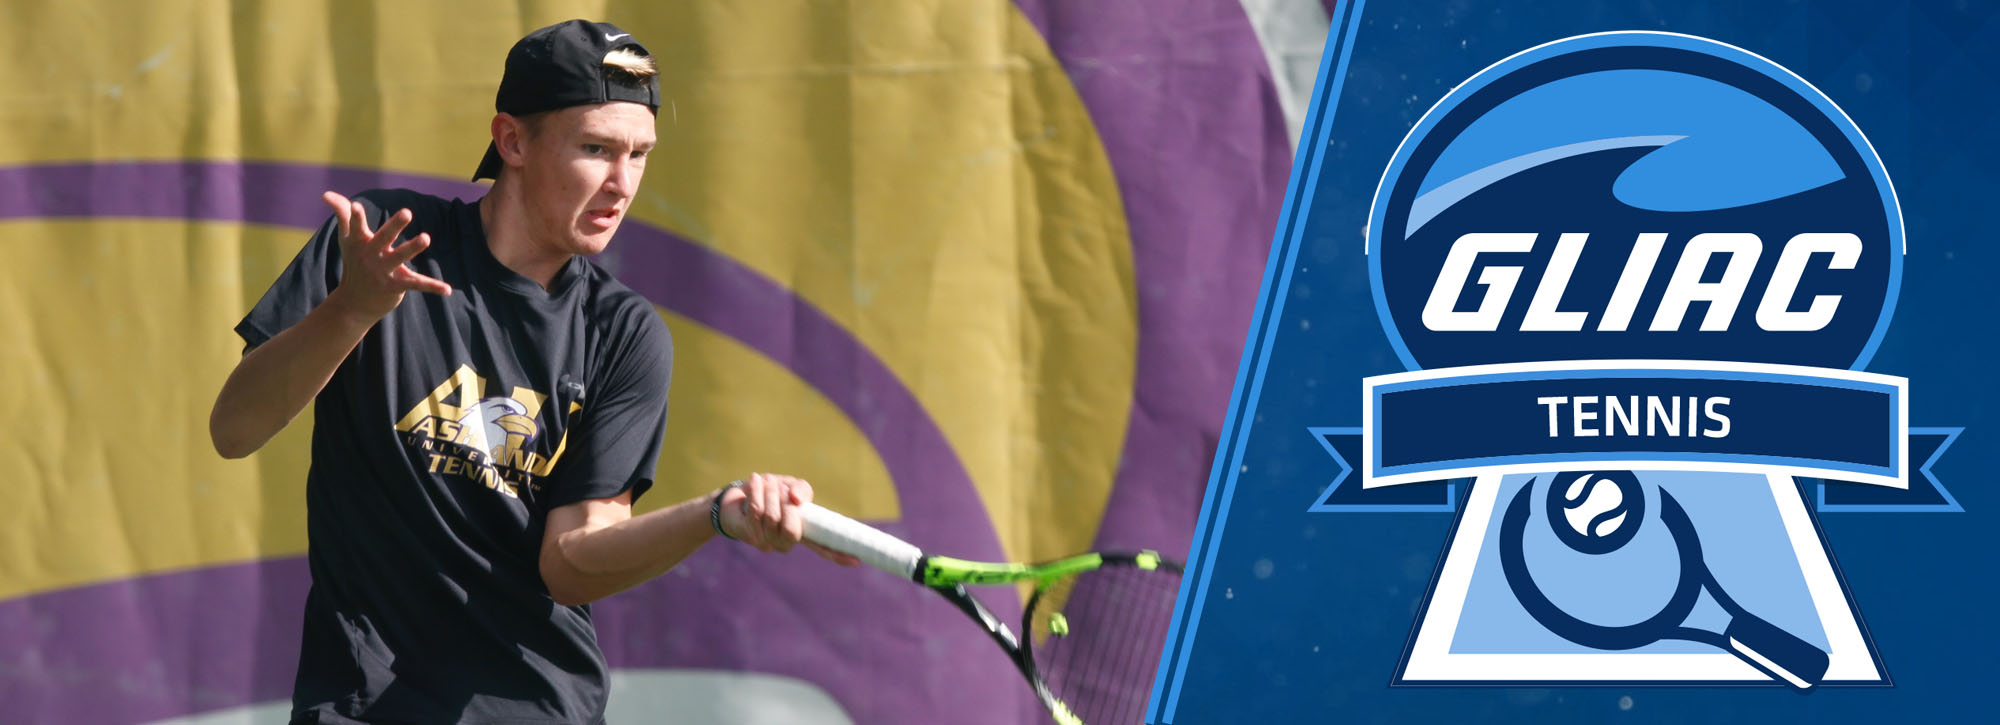 Ashland's Brdicka is named men's tennis player of the week